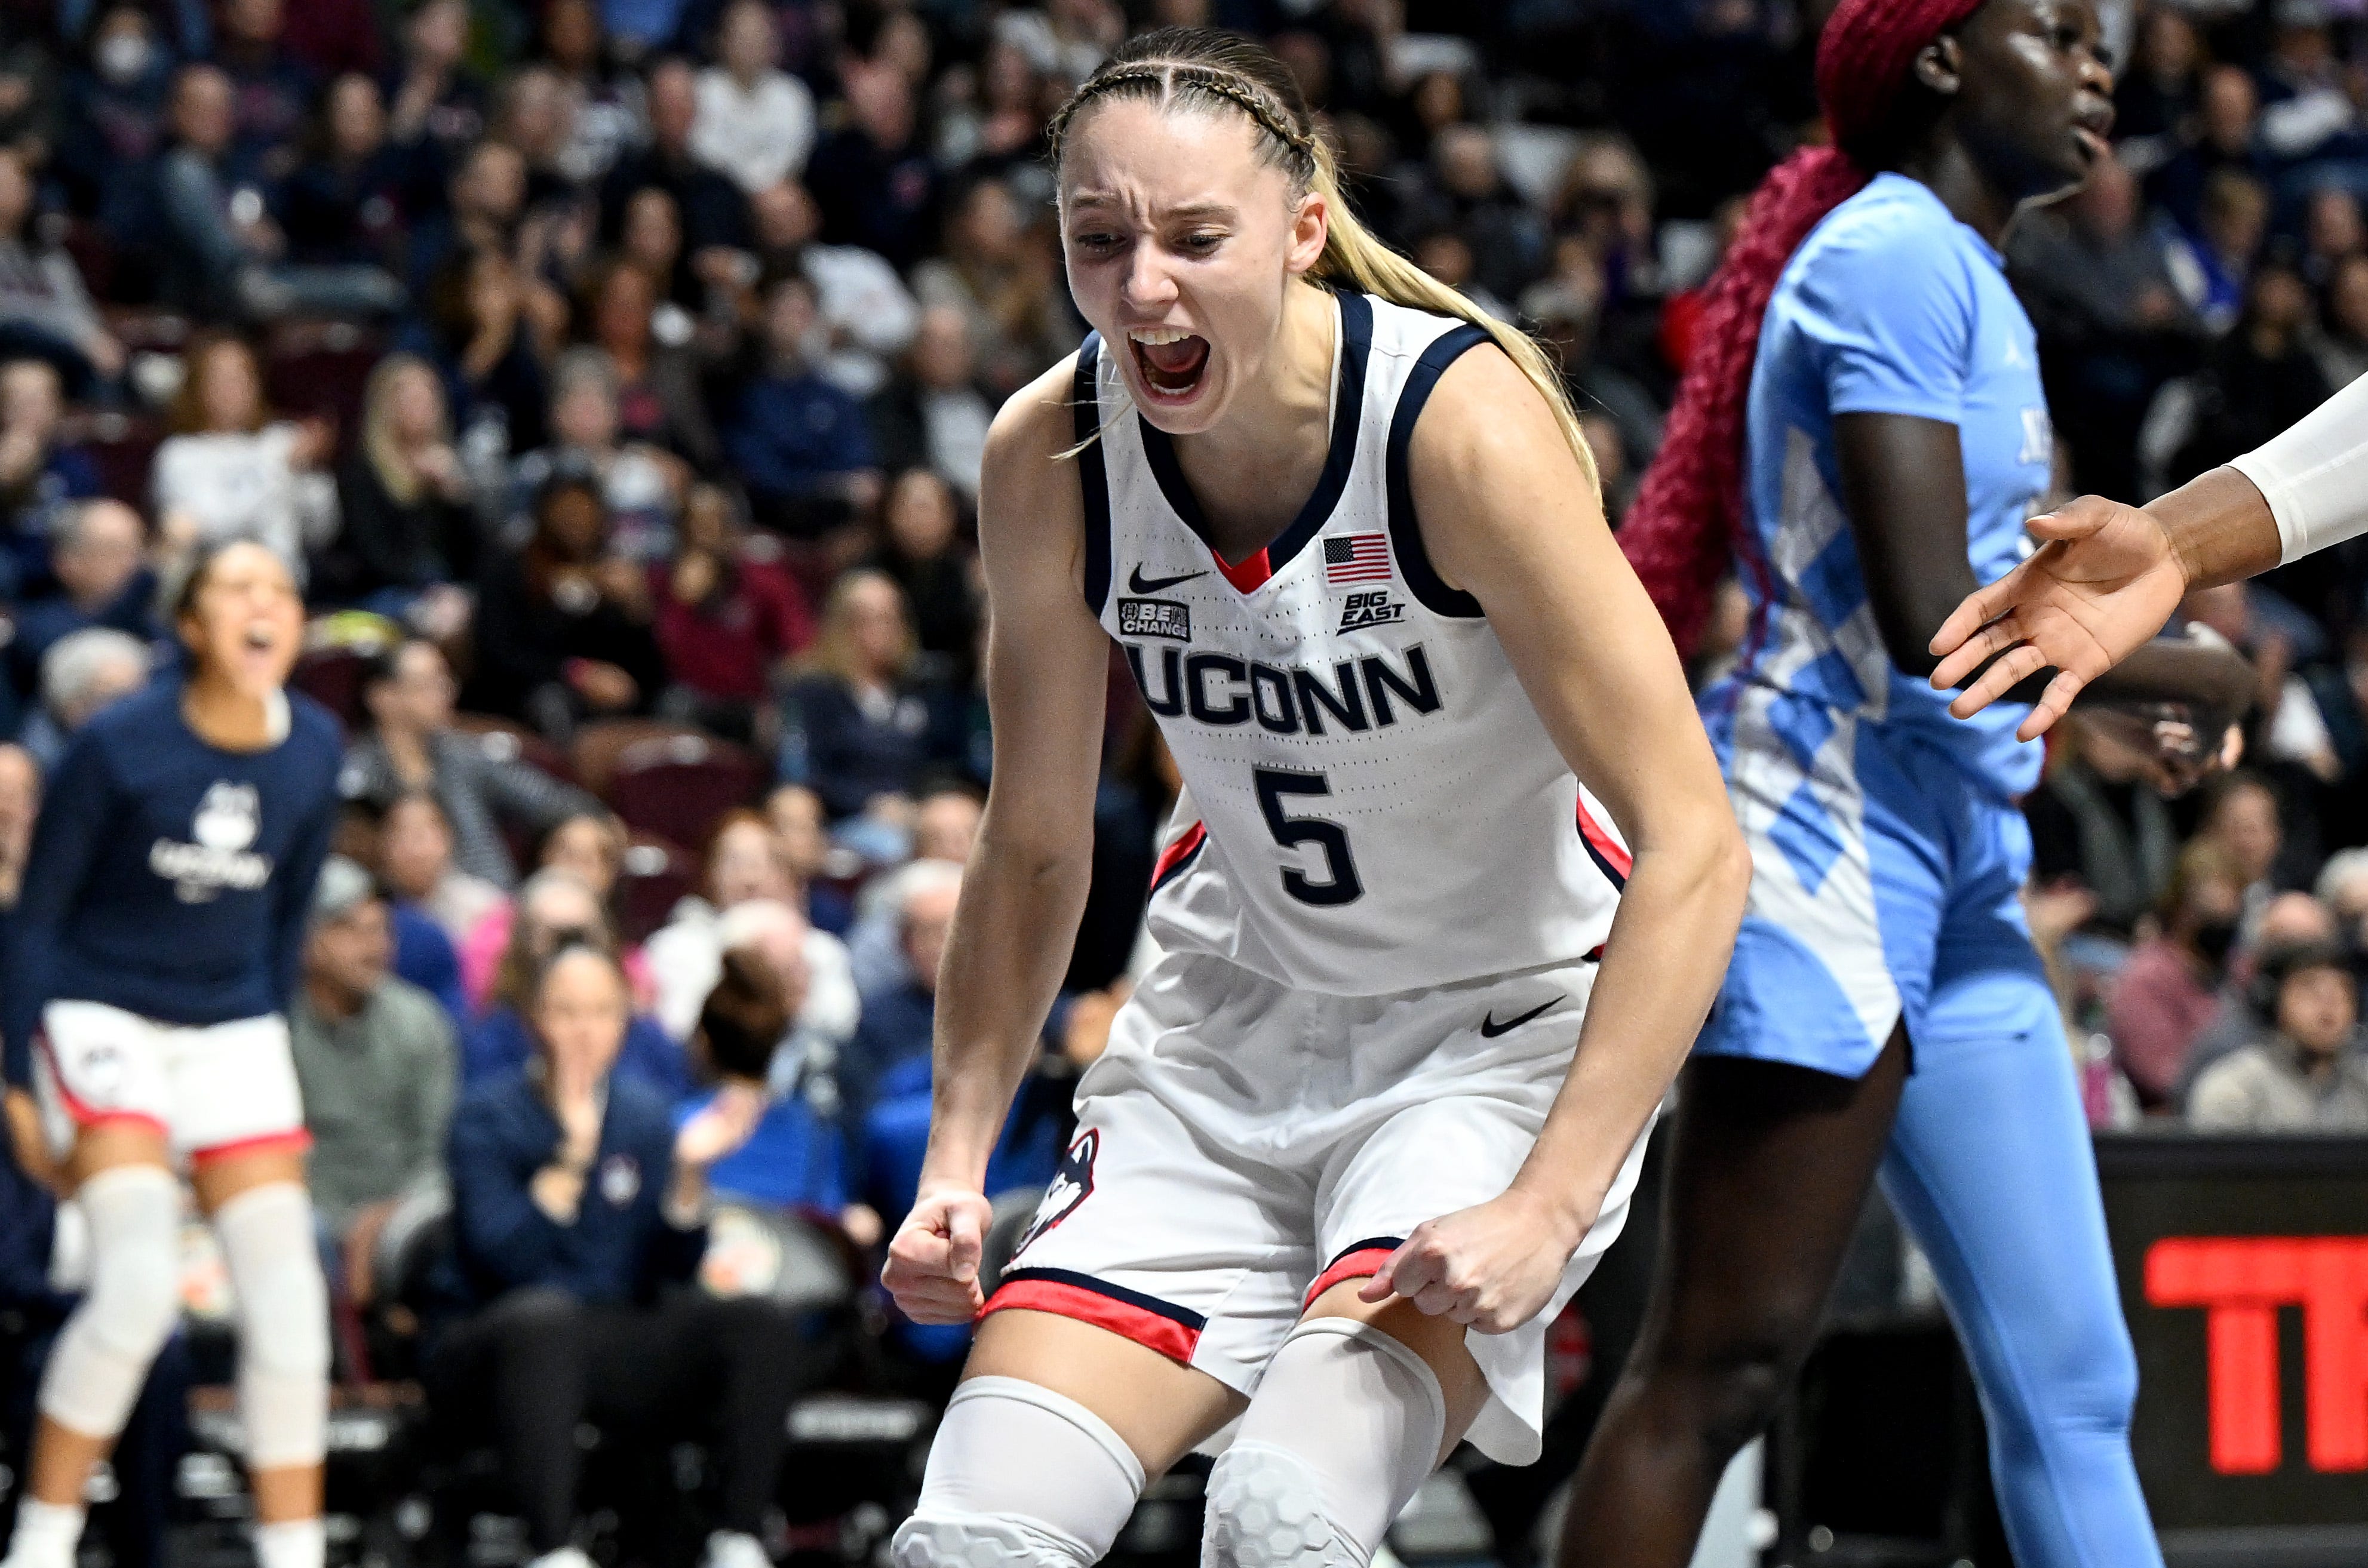 what to know about paige bueckers, uconn's star who's healthy and back to dominating ways